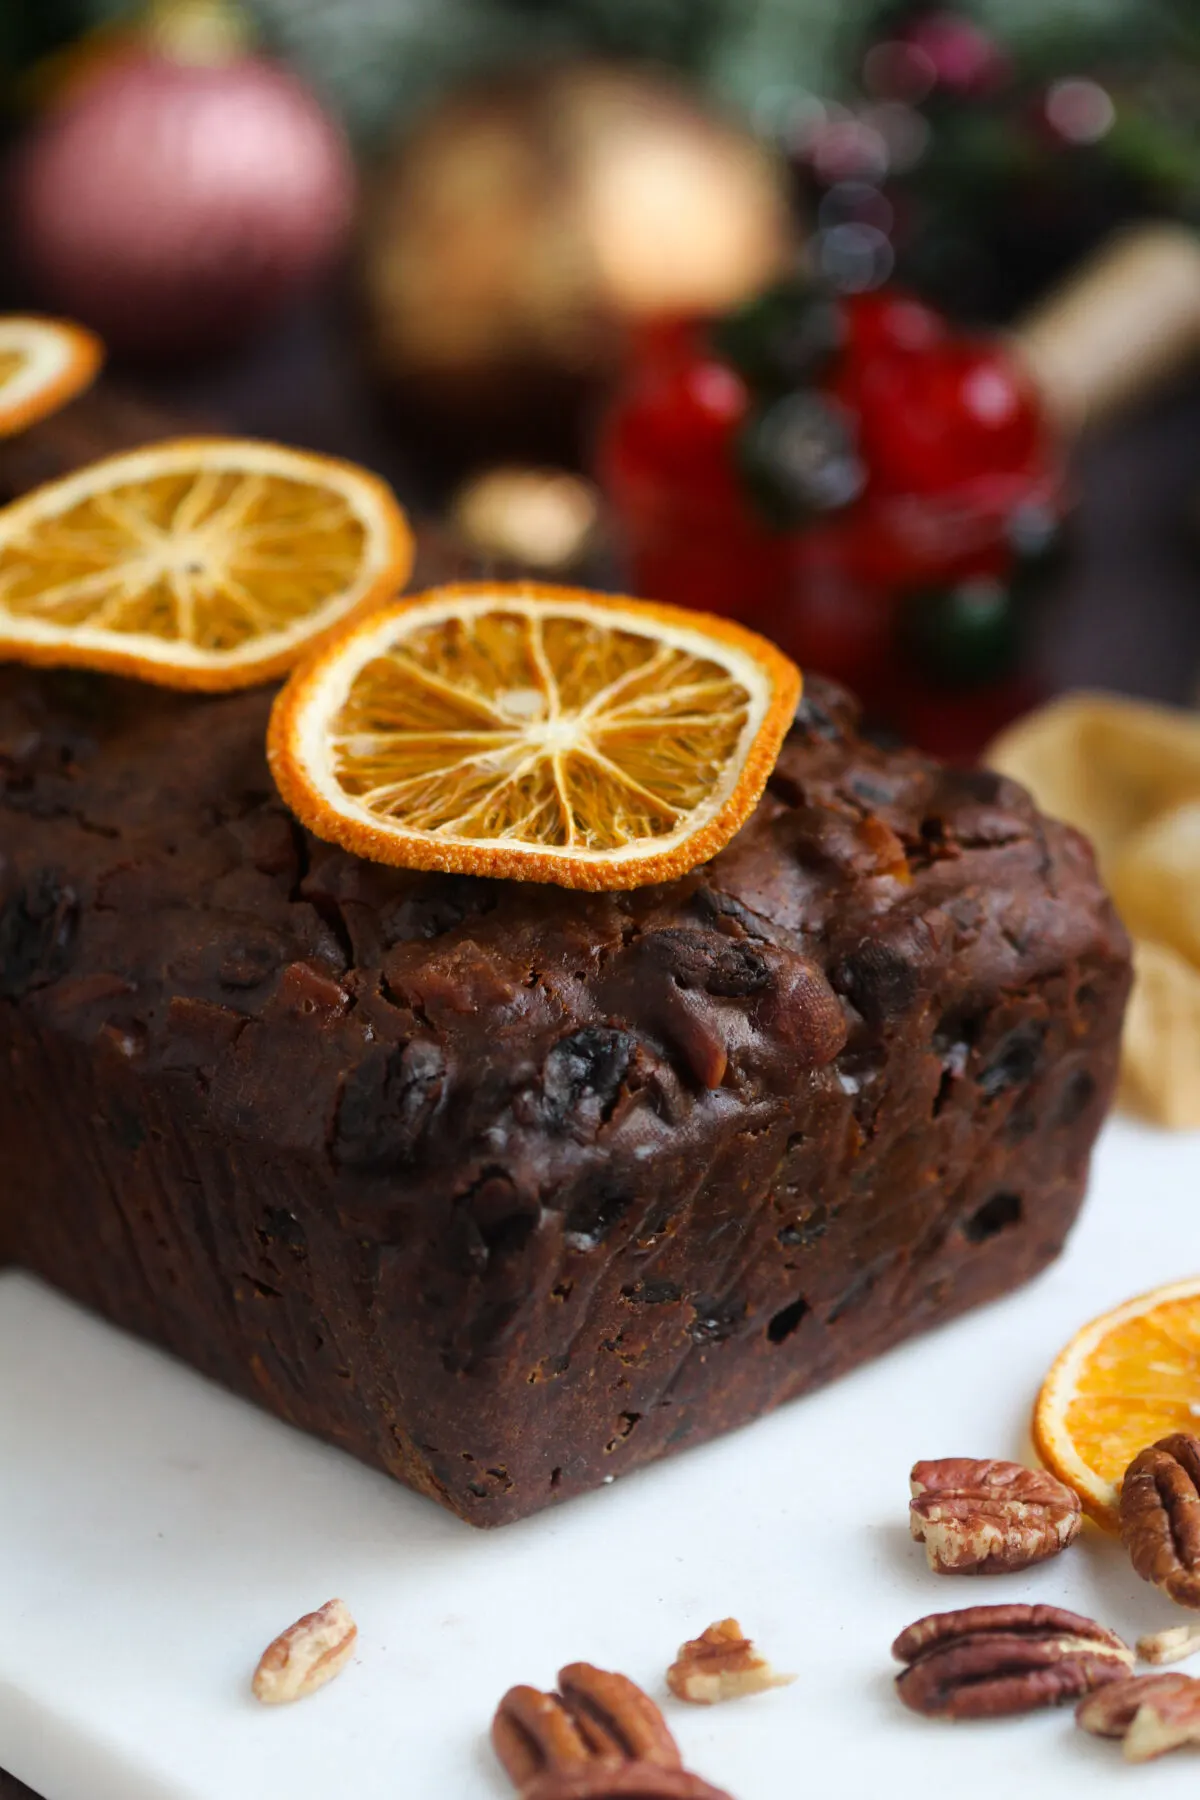 Discover the ultimate holiday fruitcake recipe! Bake up a classic fruitcake that will wow even the most discerning fruitcake enthusiast.